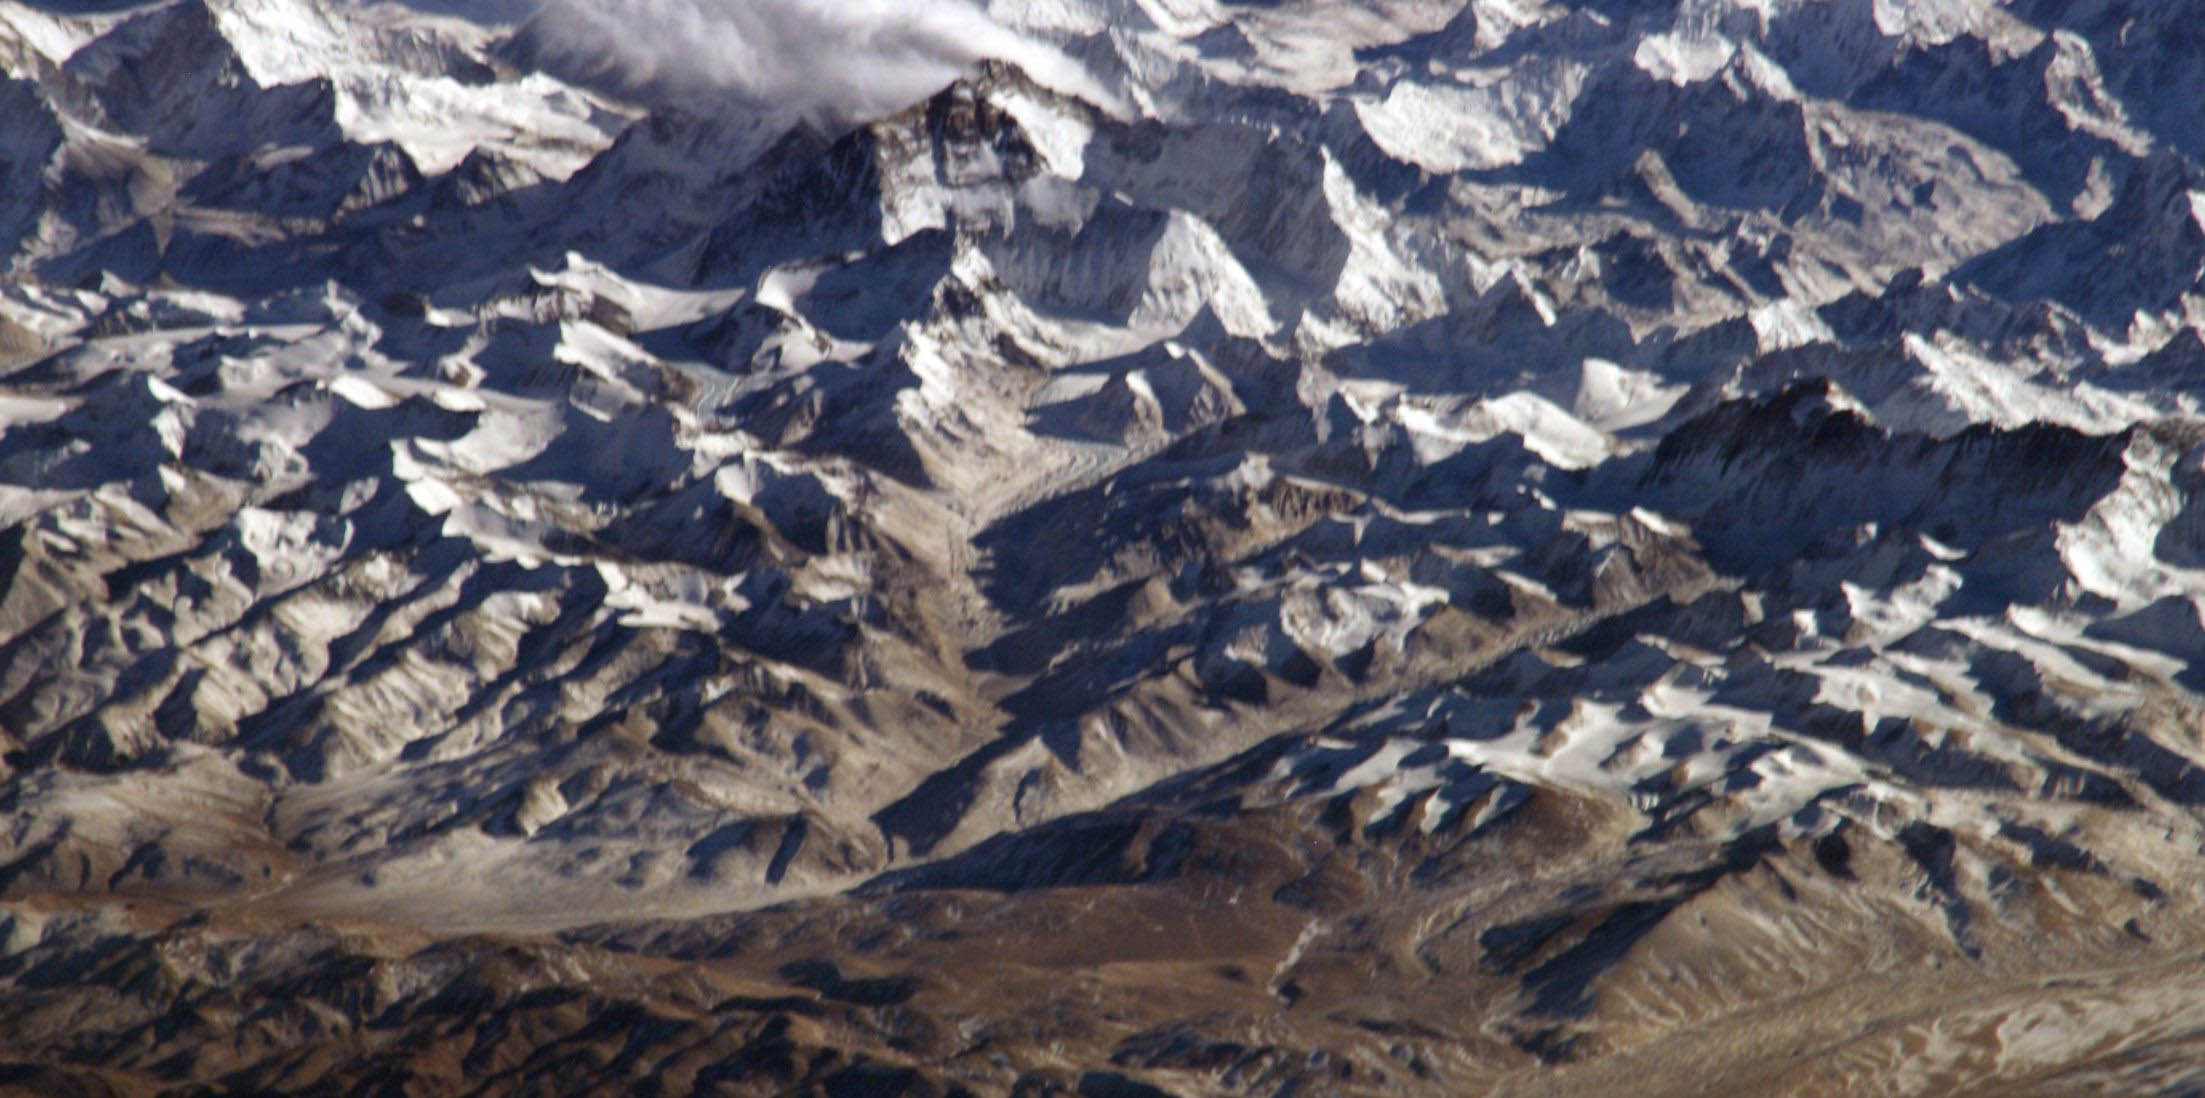 Image depicting himalayas, as in, Non-uniformity of Himalayas could lead to large earthquake events